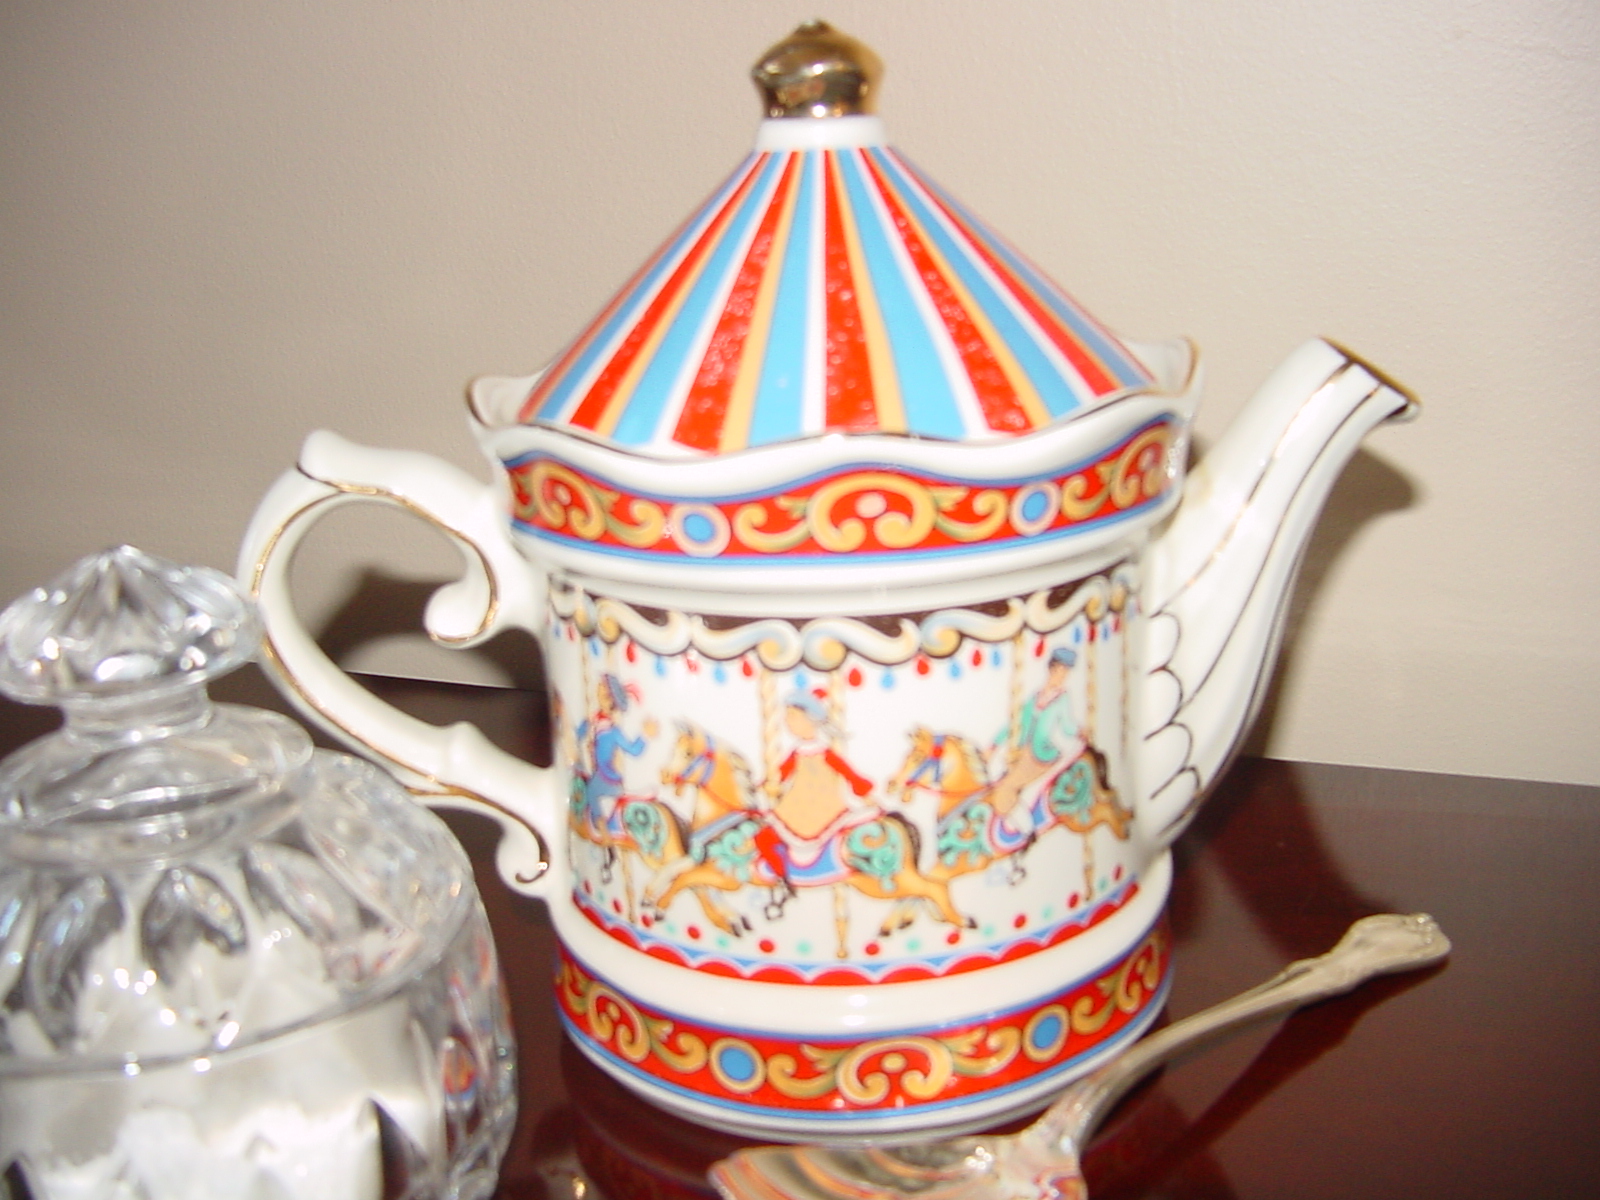 a decorative teapot that is on top of a table